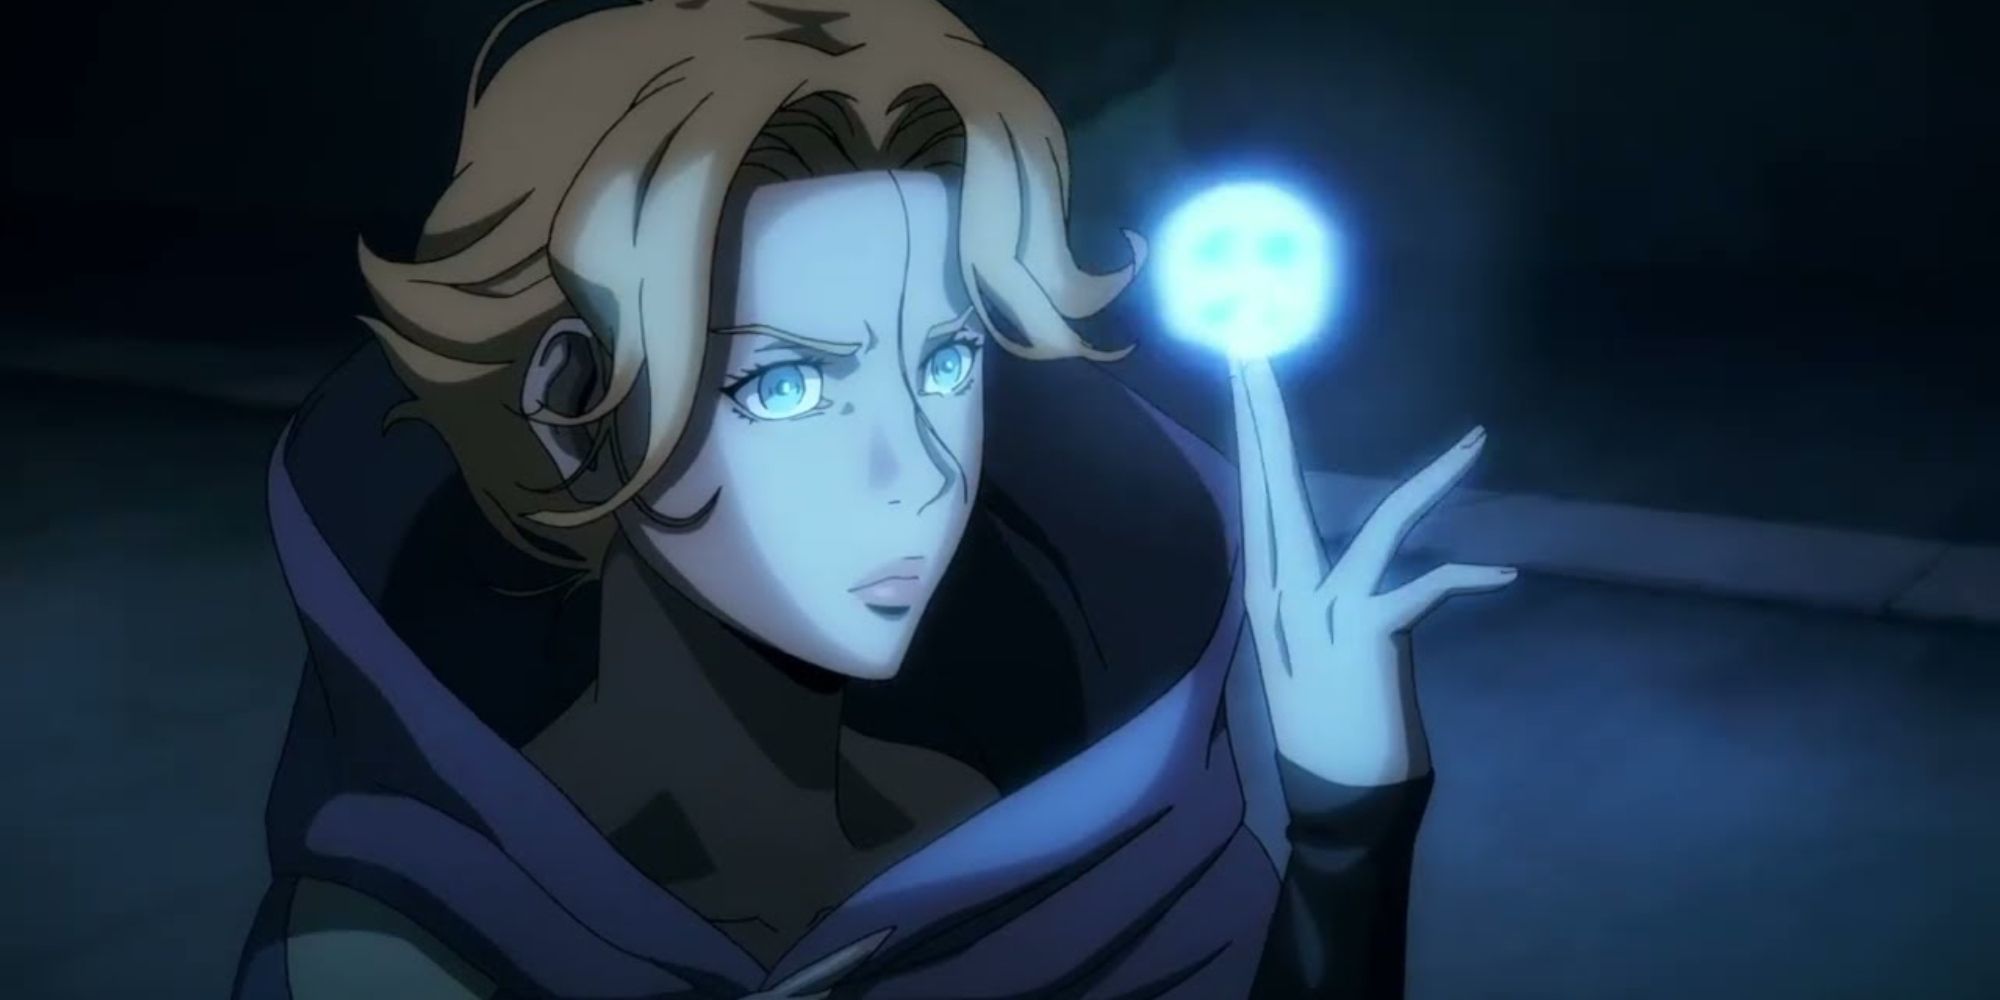 sypha using her ice powers